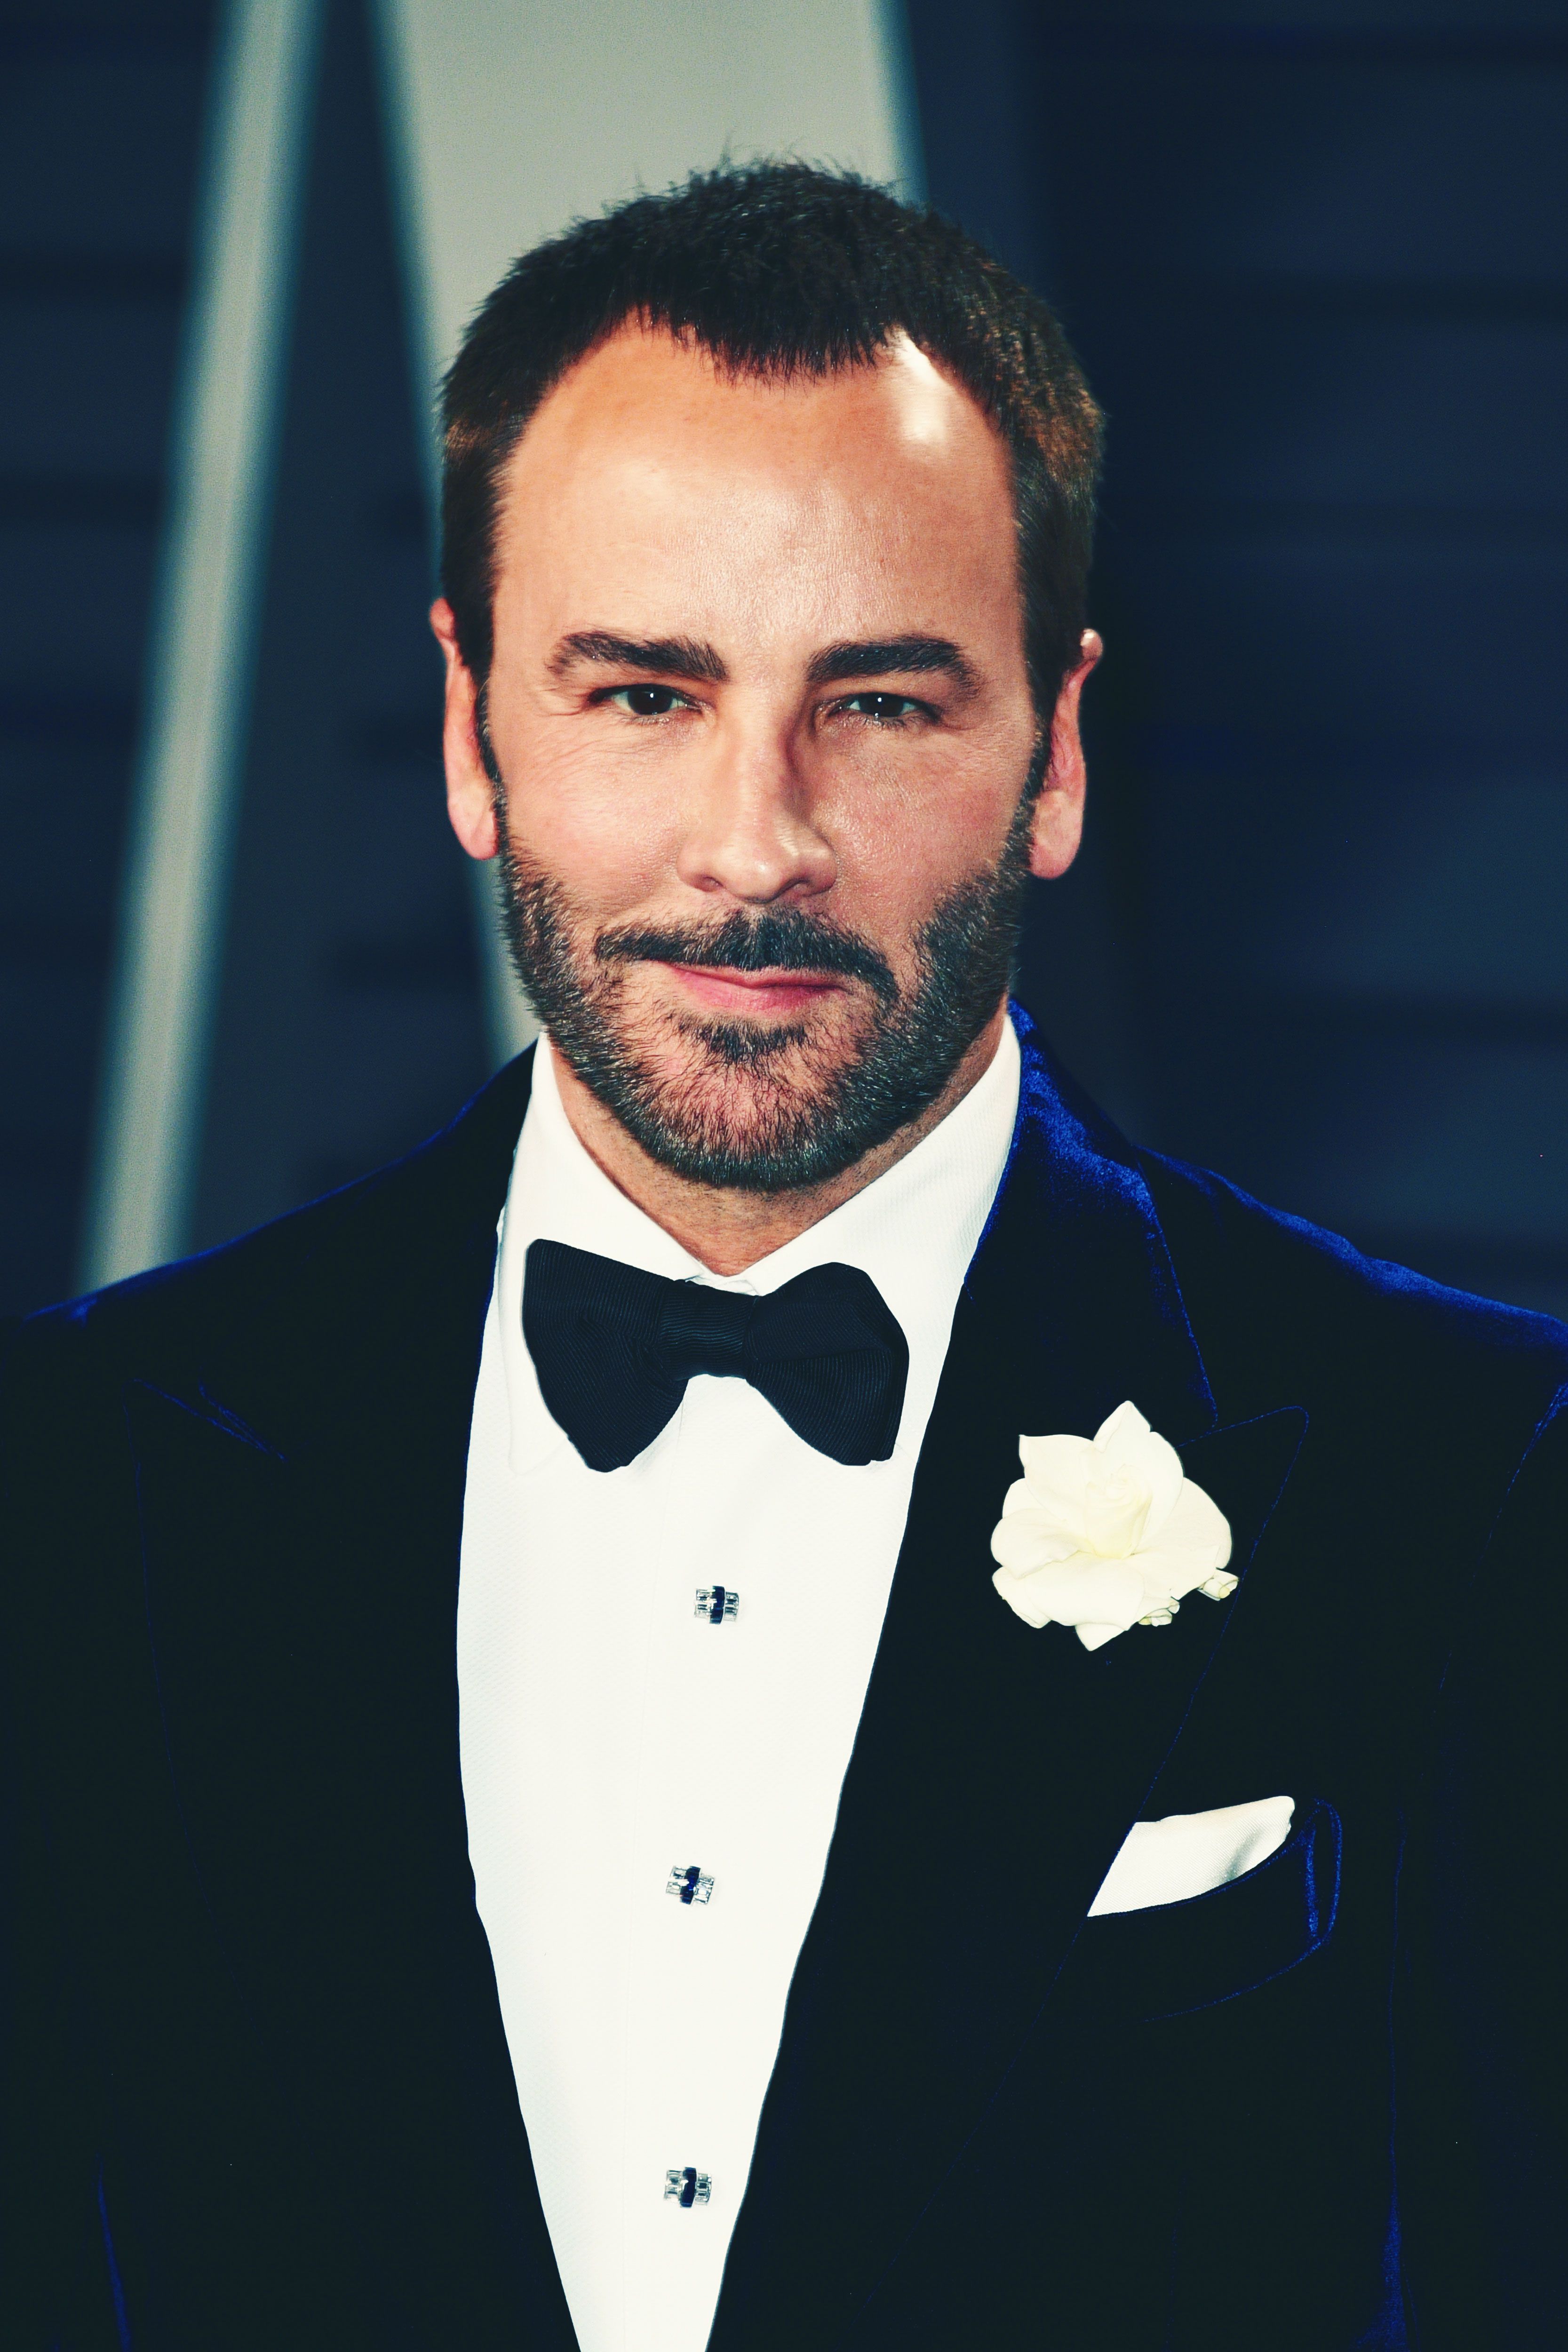 Tom Ford to Replace Diane von Furstenberg as Chairman of CFDA